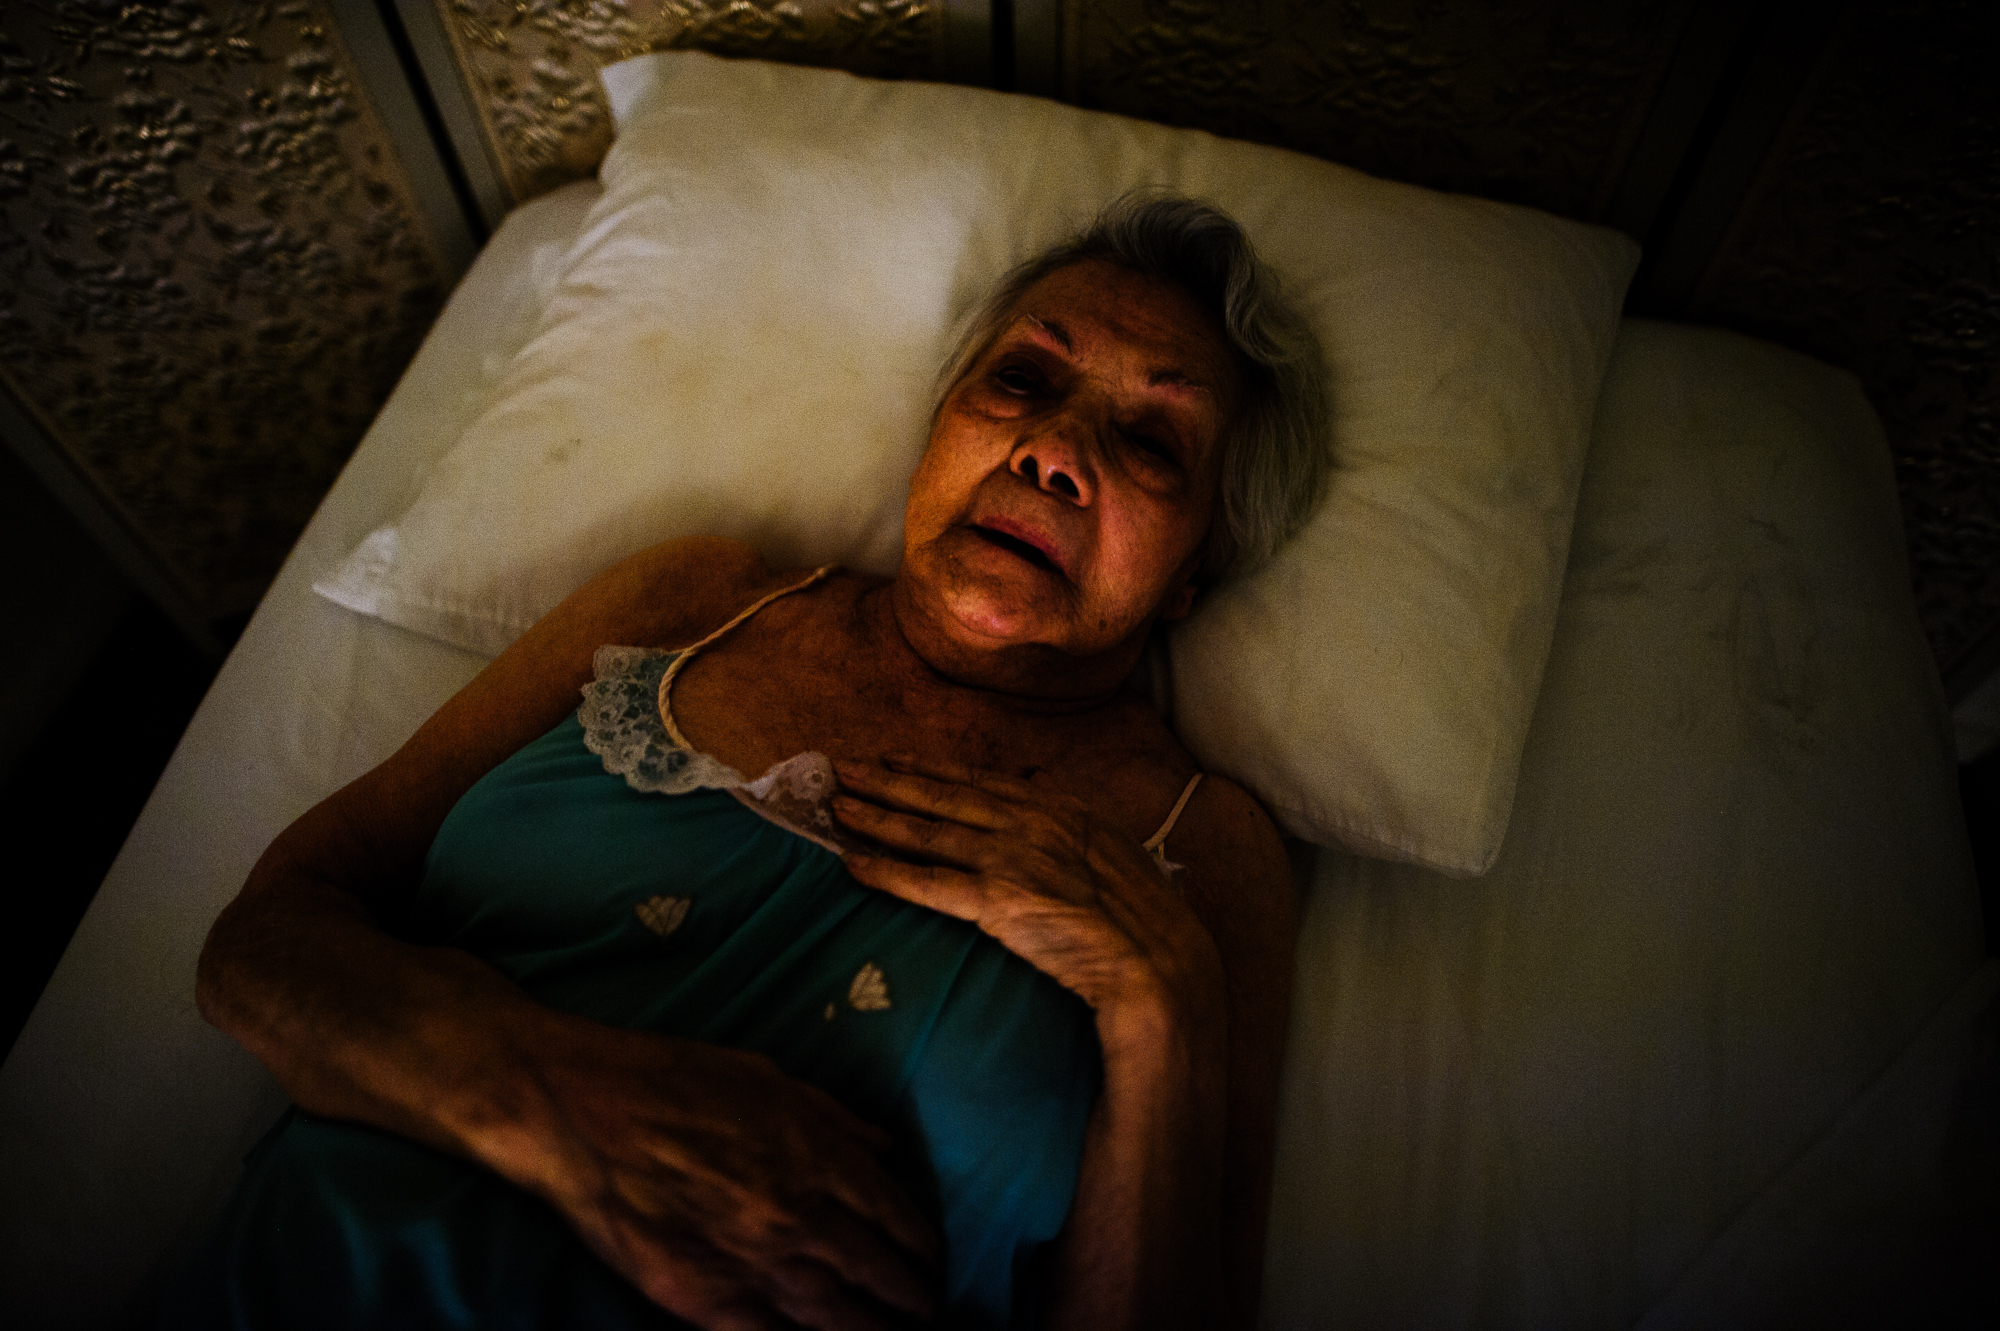  Bianca, age 87, lies on her bed, 2012.  